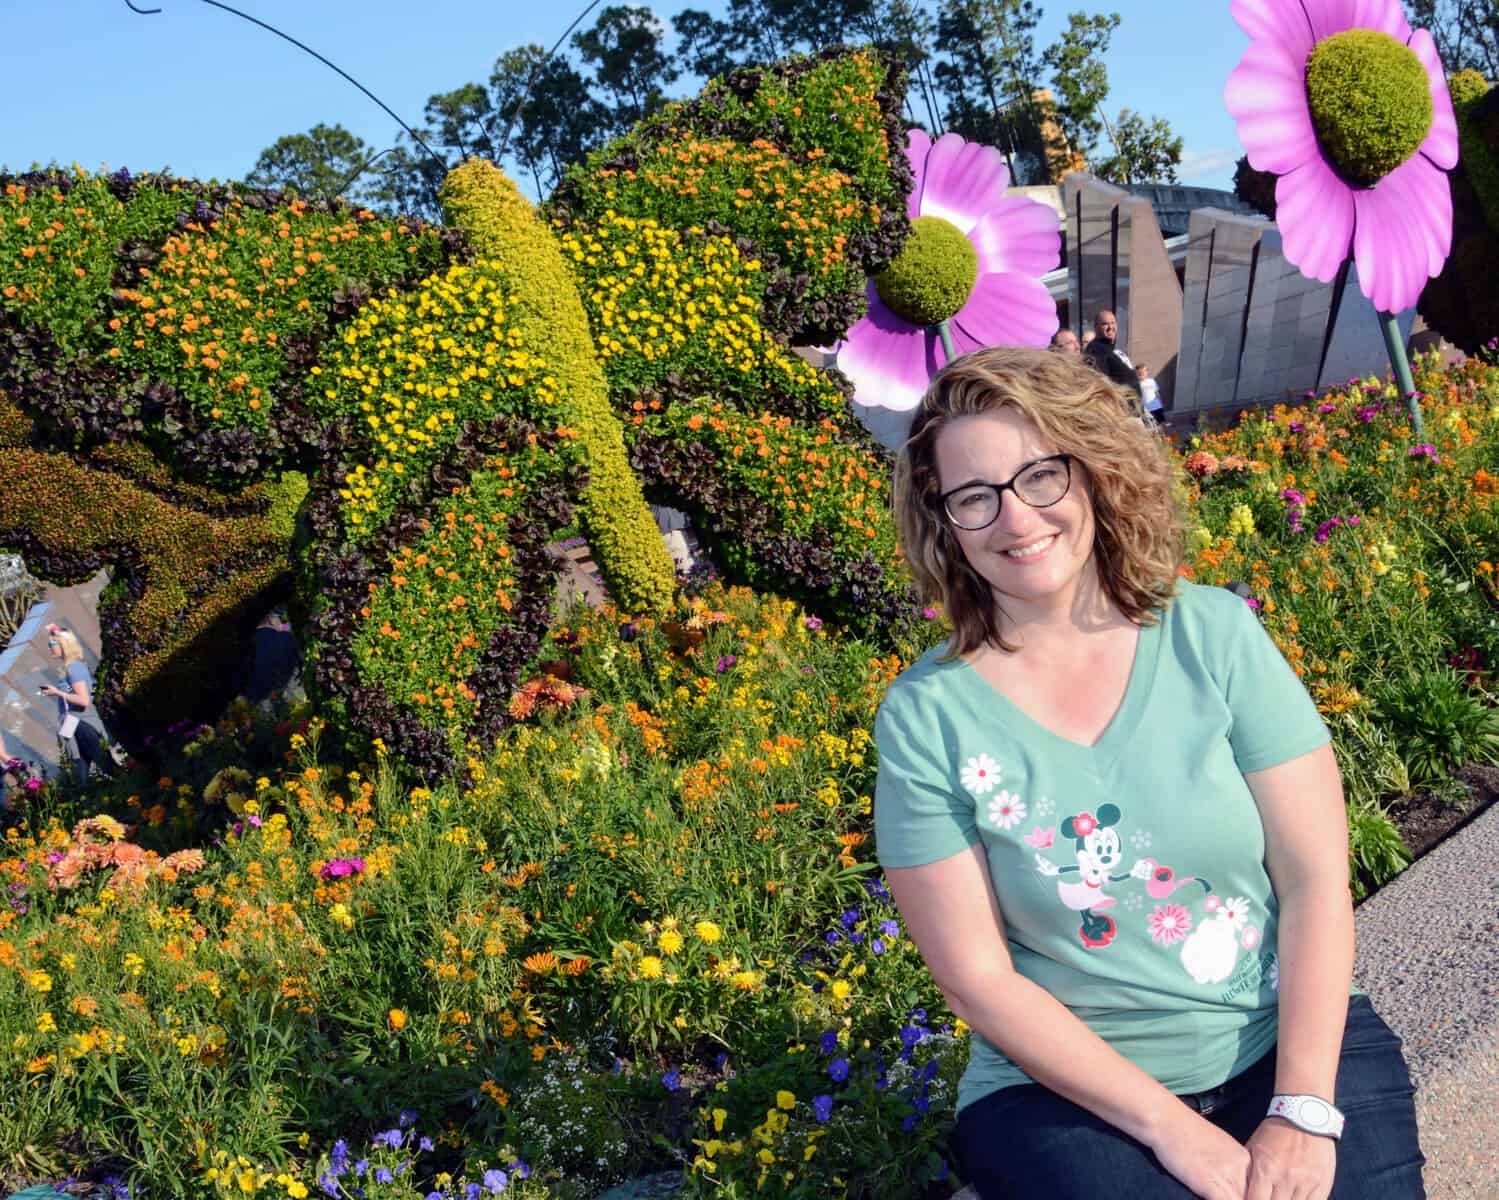 Pros and cons of taking a solo trip to Disney World